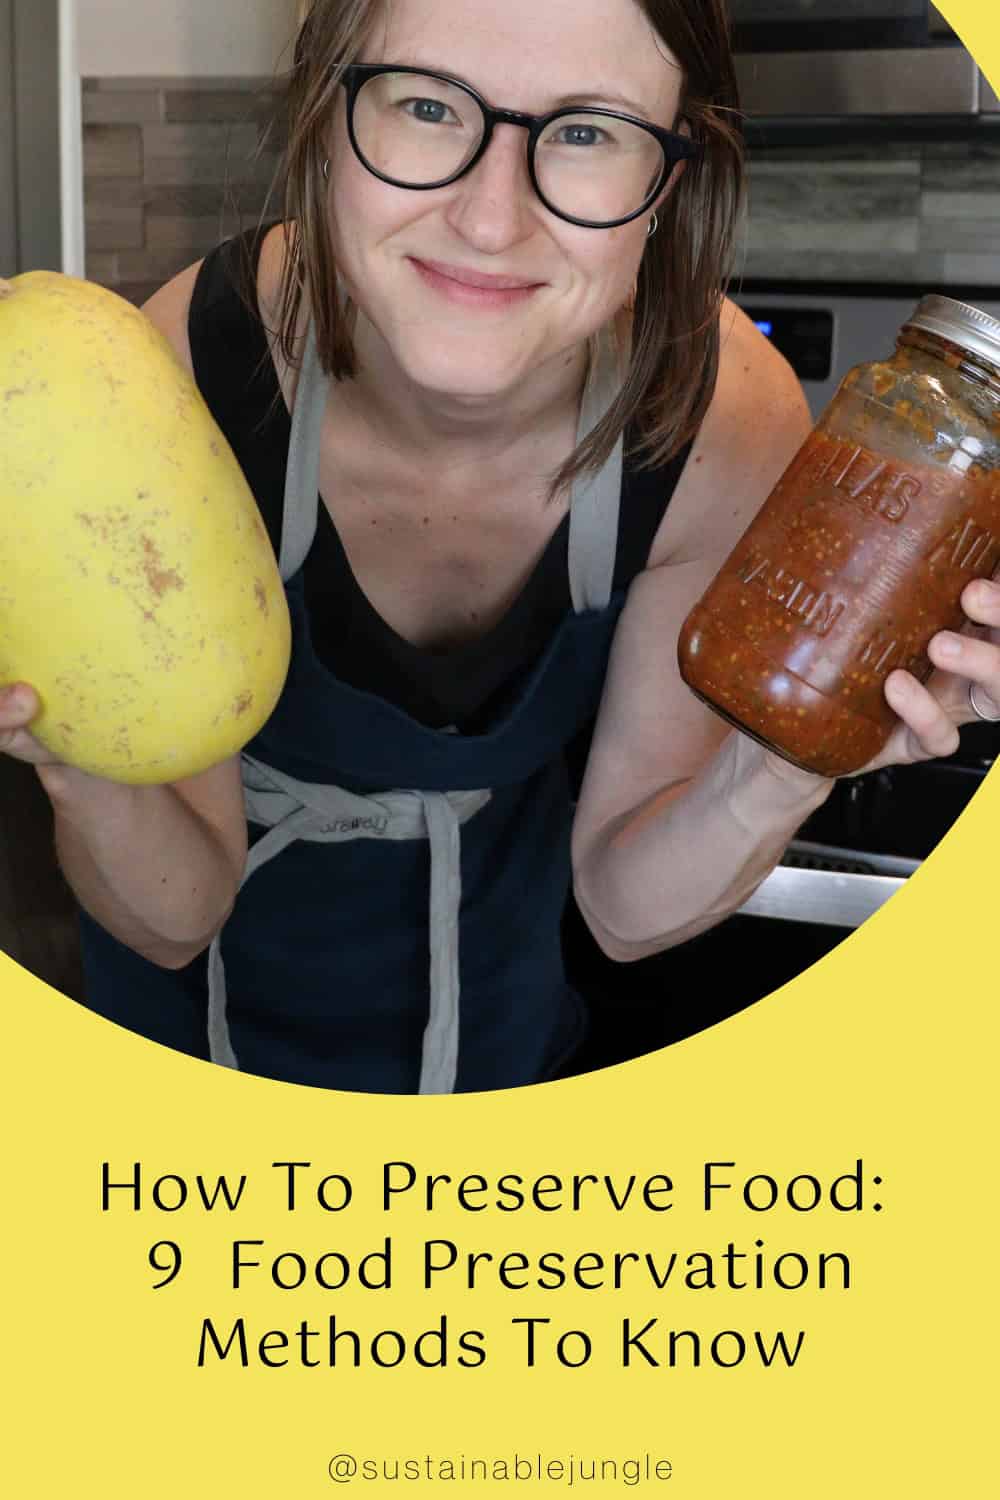 How To Preserve Food: 9 Food Preservation Methods For Scrumptious Self-Sufficiency Image by Sustainable Jungle #foodpreservation #foodpreservationmethods #howtopreservefood #waystopreservefood #bestwaystopreservefood #sustainablejungle